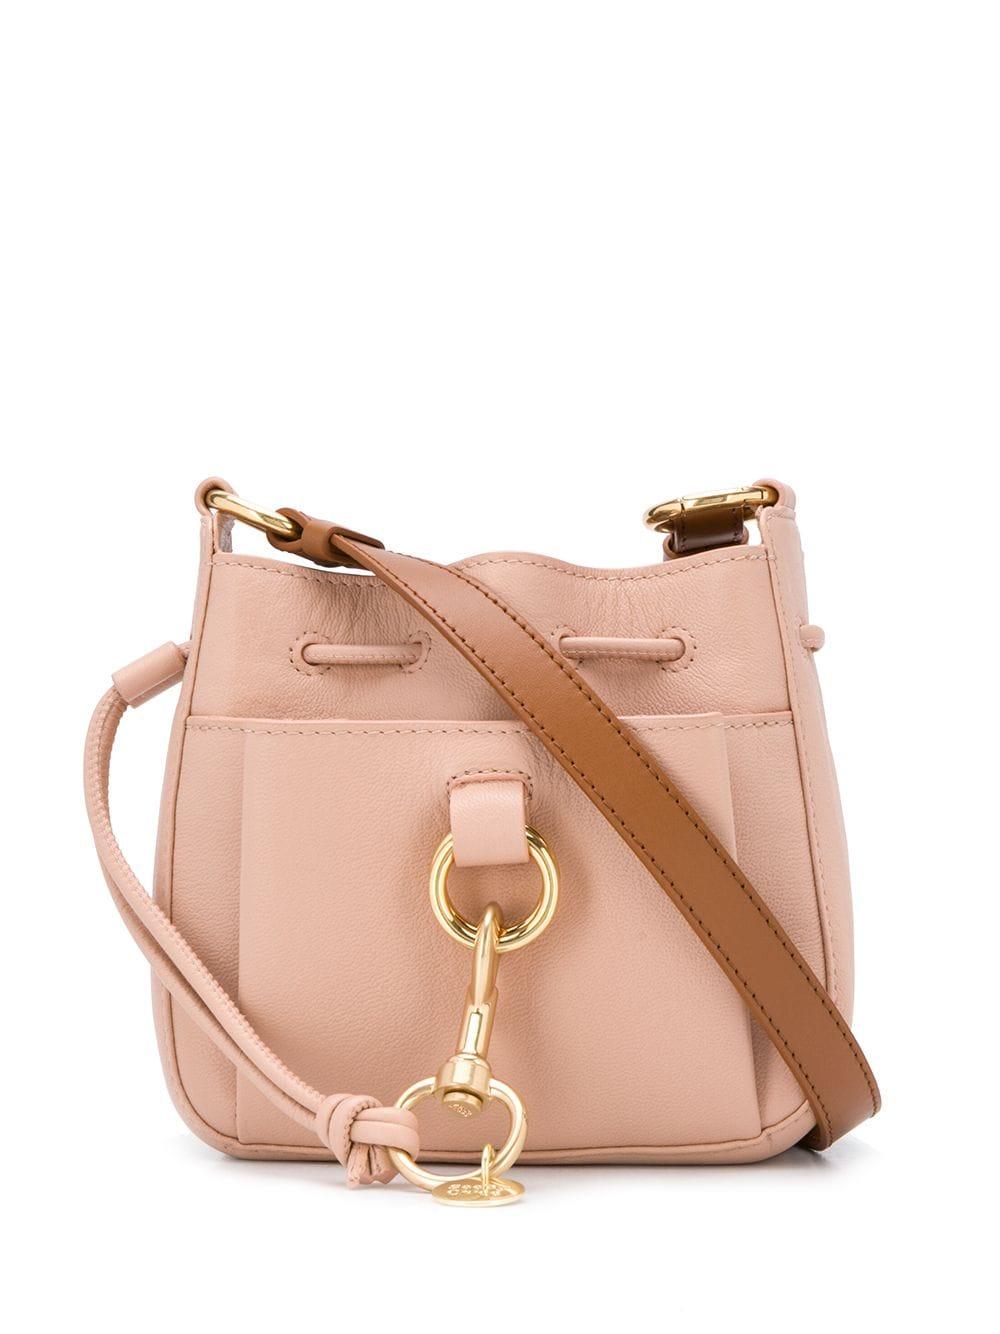 See By Chloé Small Tony Bucket Bag in Pink | Lyst